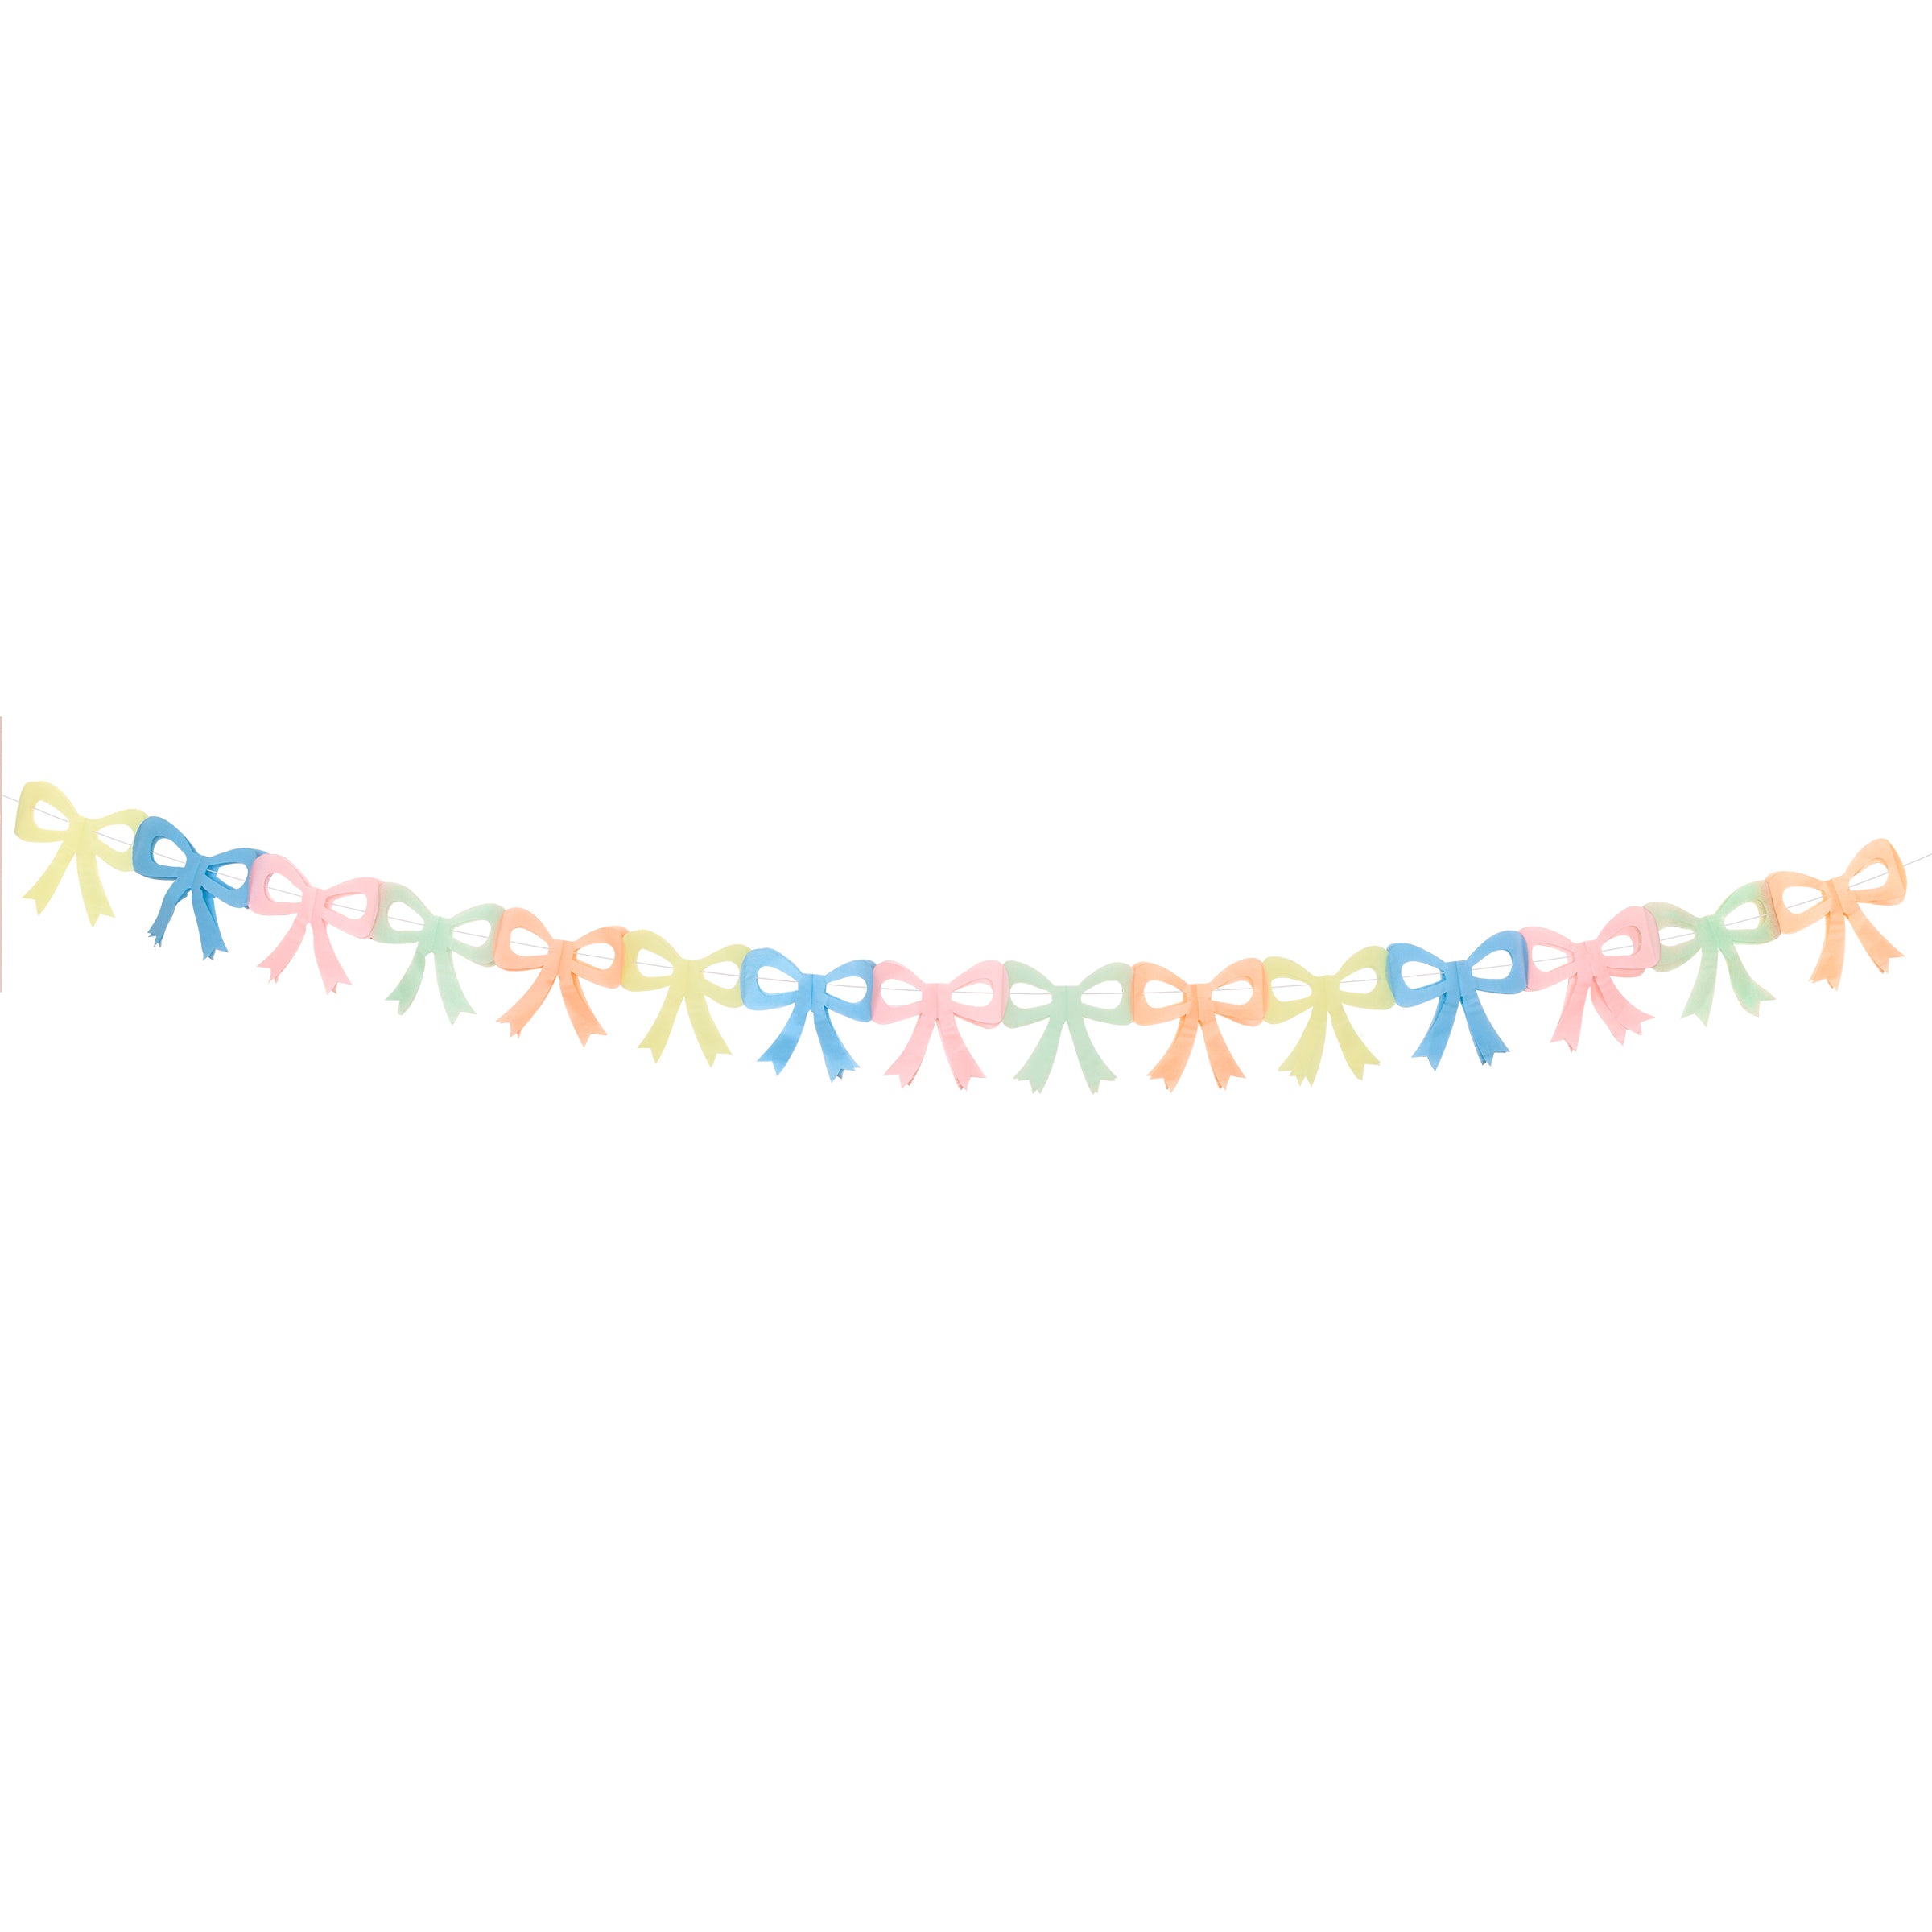 Our pack of 3 party garlands, with colourful bows, is ideal as Easter decorations.